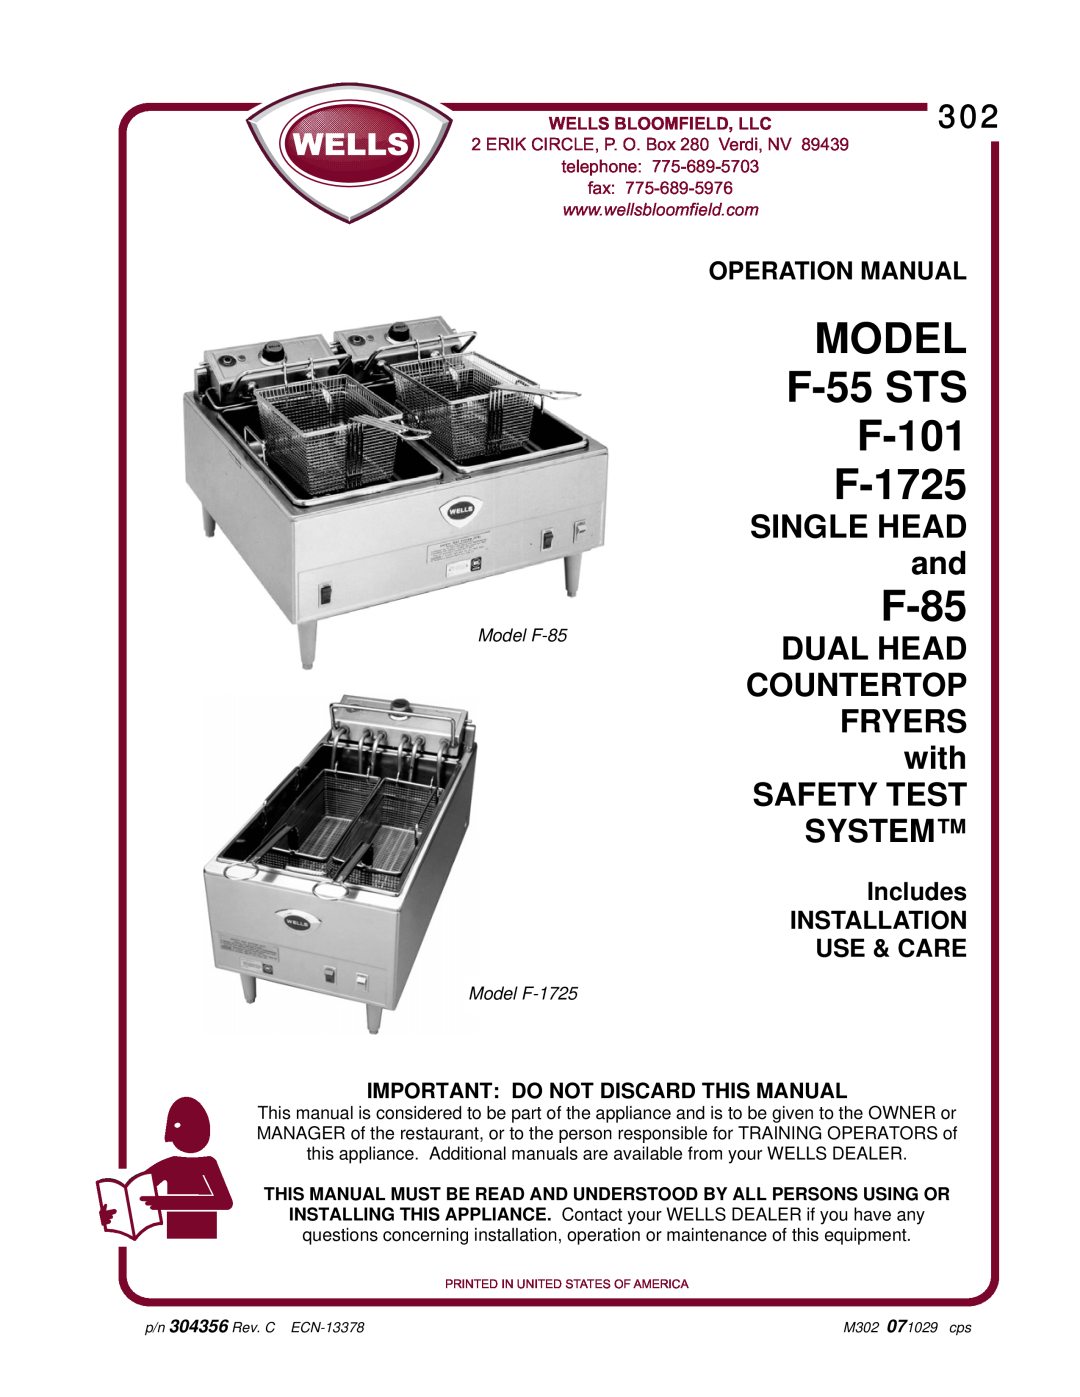 Wells operation manual Important Do Not Discard This Manual, MODEL F-55STS F-101 F-1725, F-85, SINGLE HEAD and, fax 